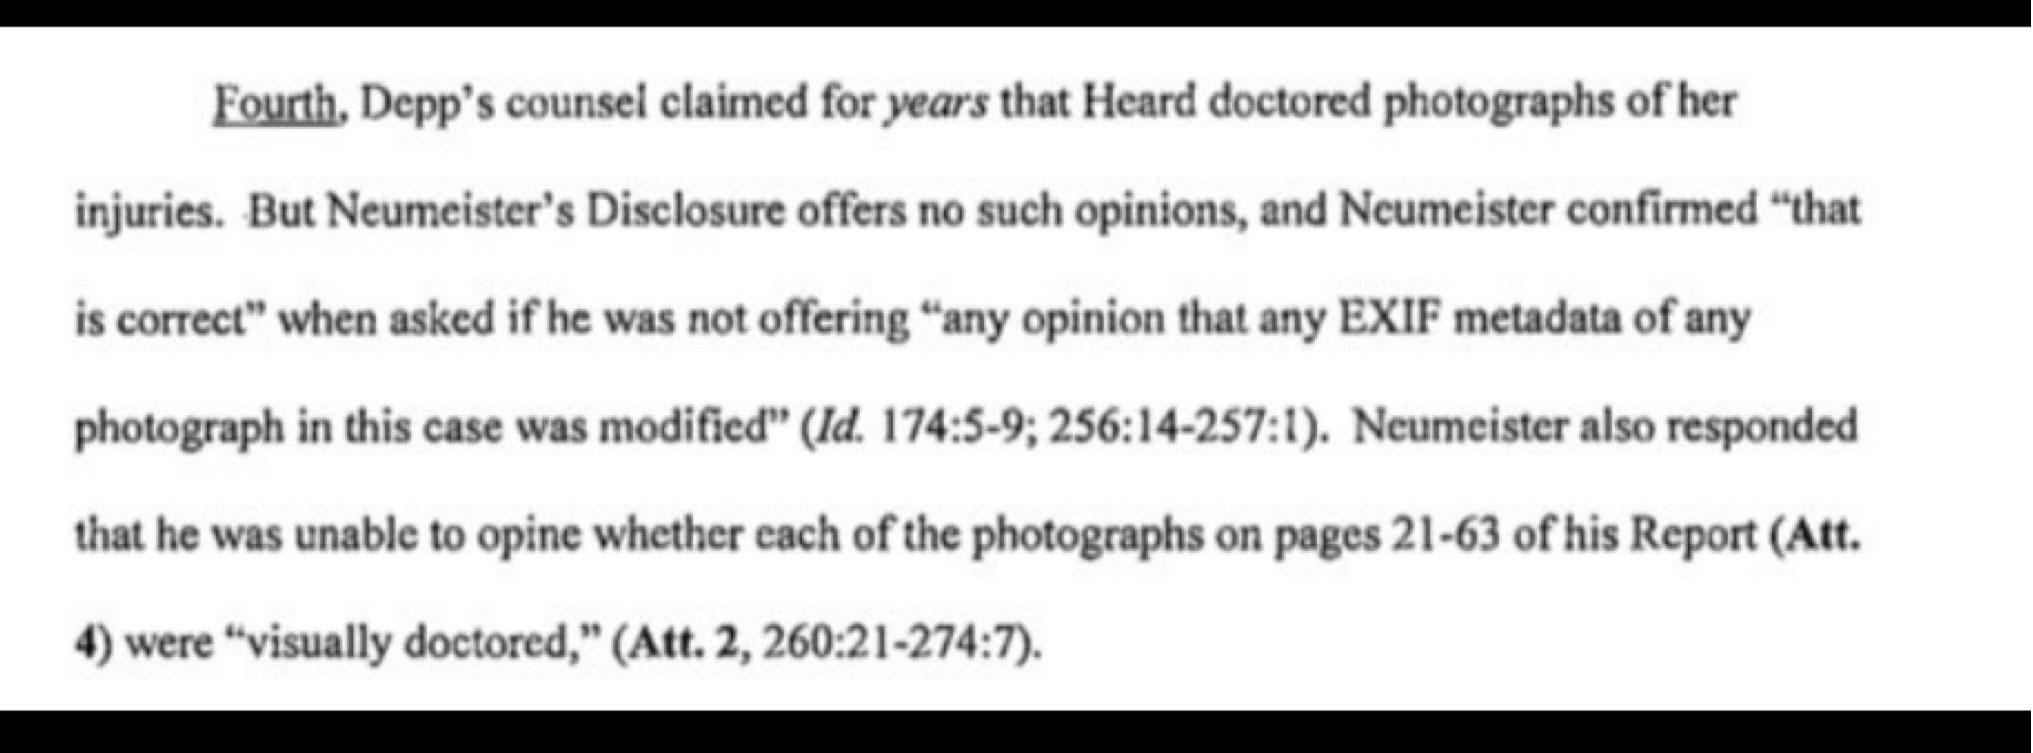 Extract from Unsealed court documents